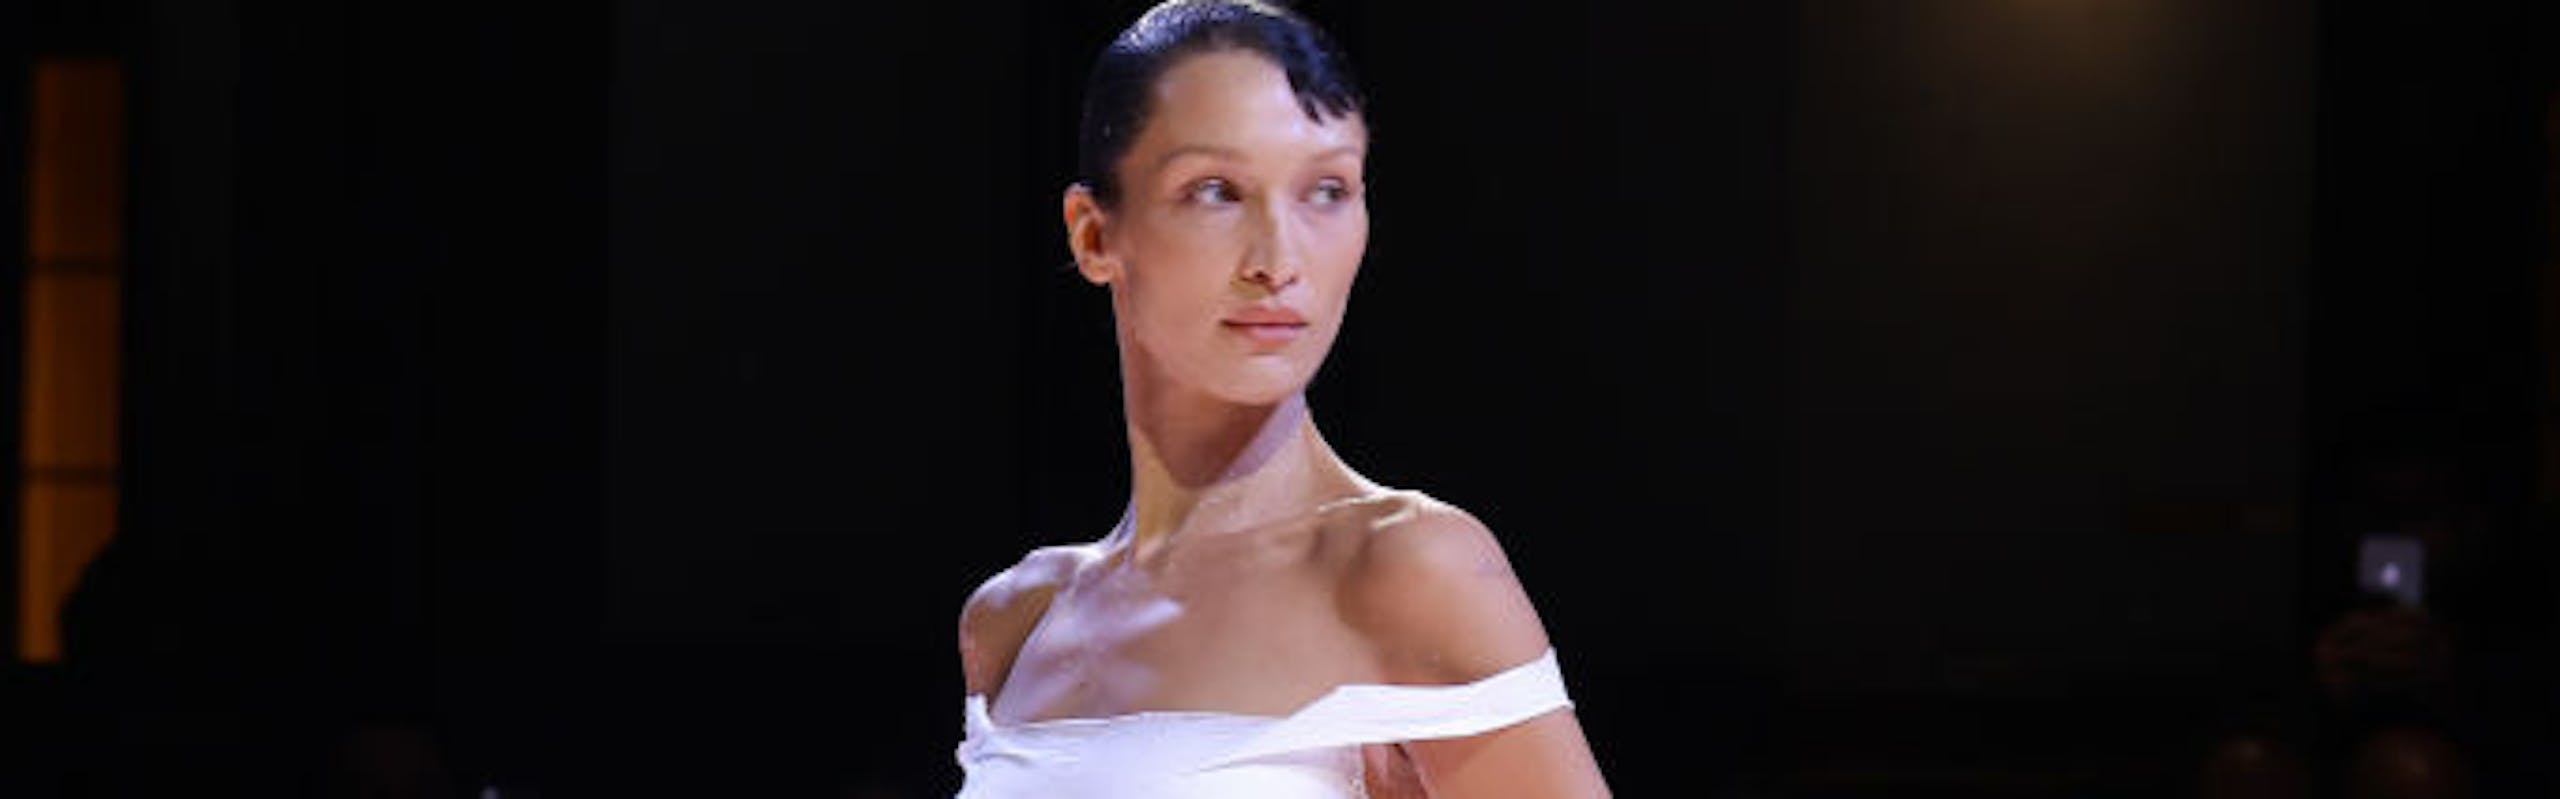 A model in a white dress while posing on the runway.